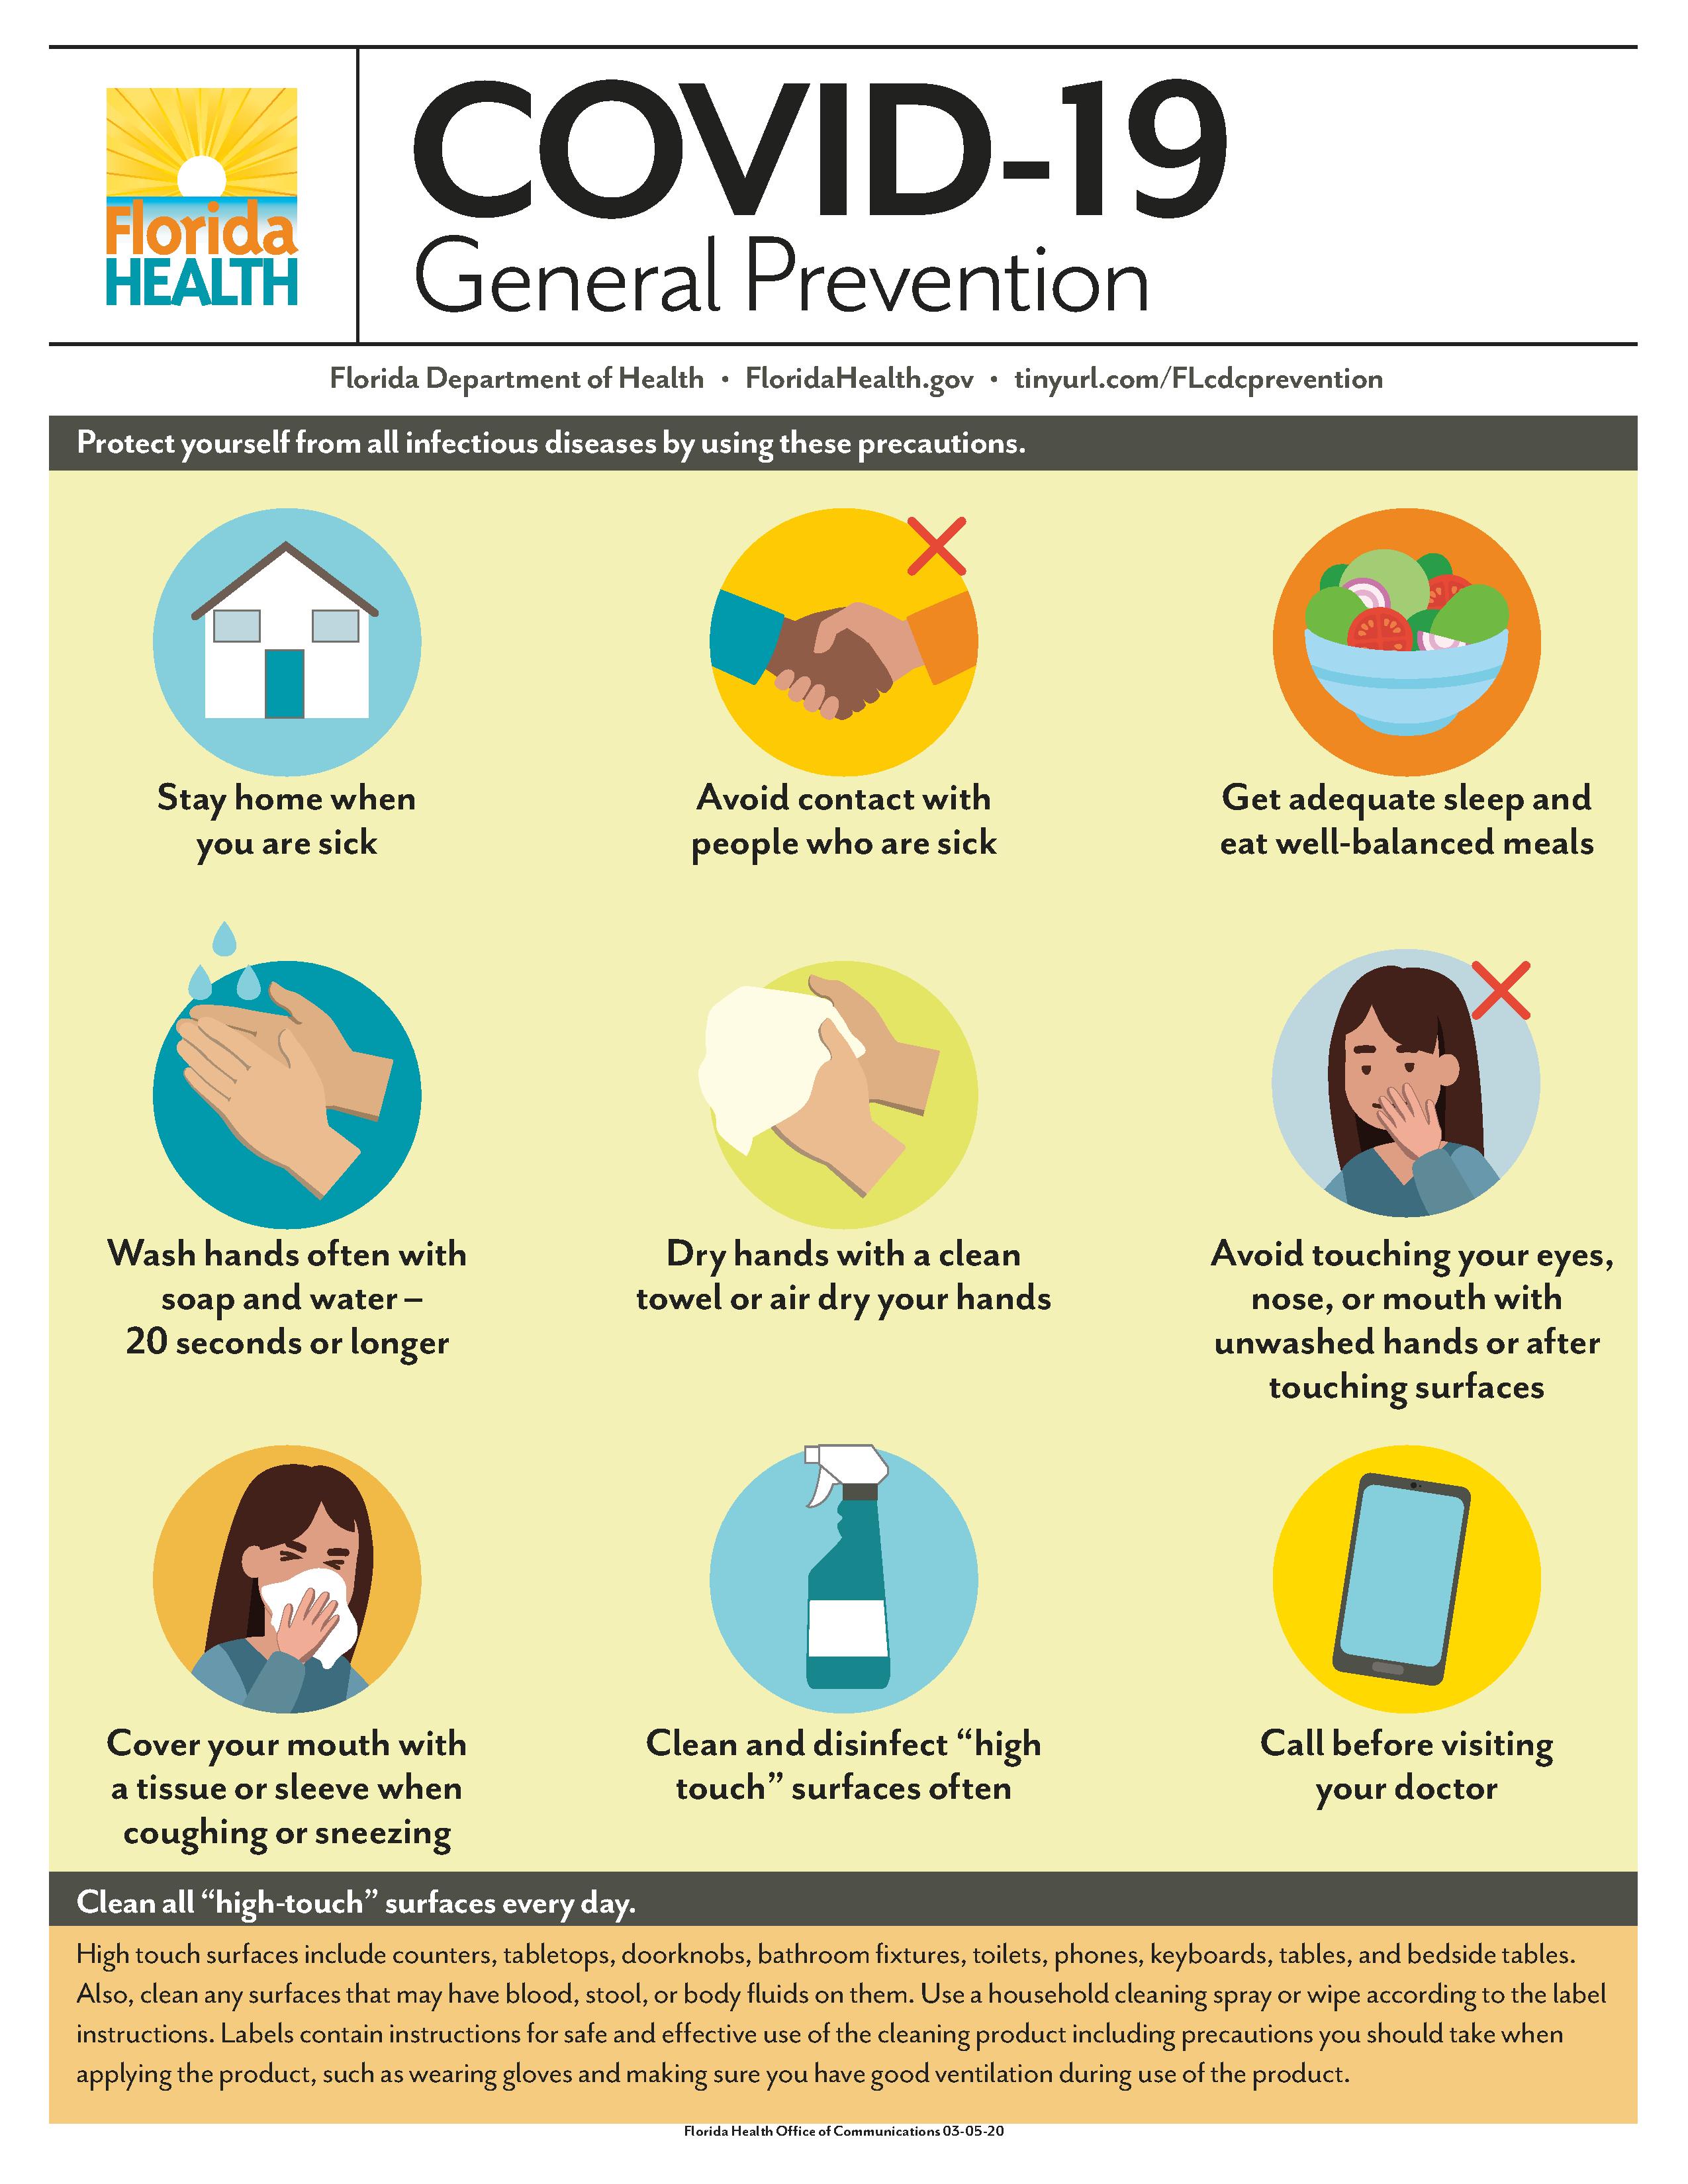 Florida Department of Health COVID-19 Generral Prevention Flyer